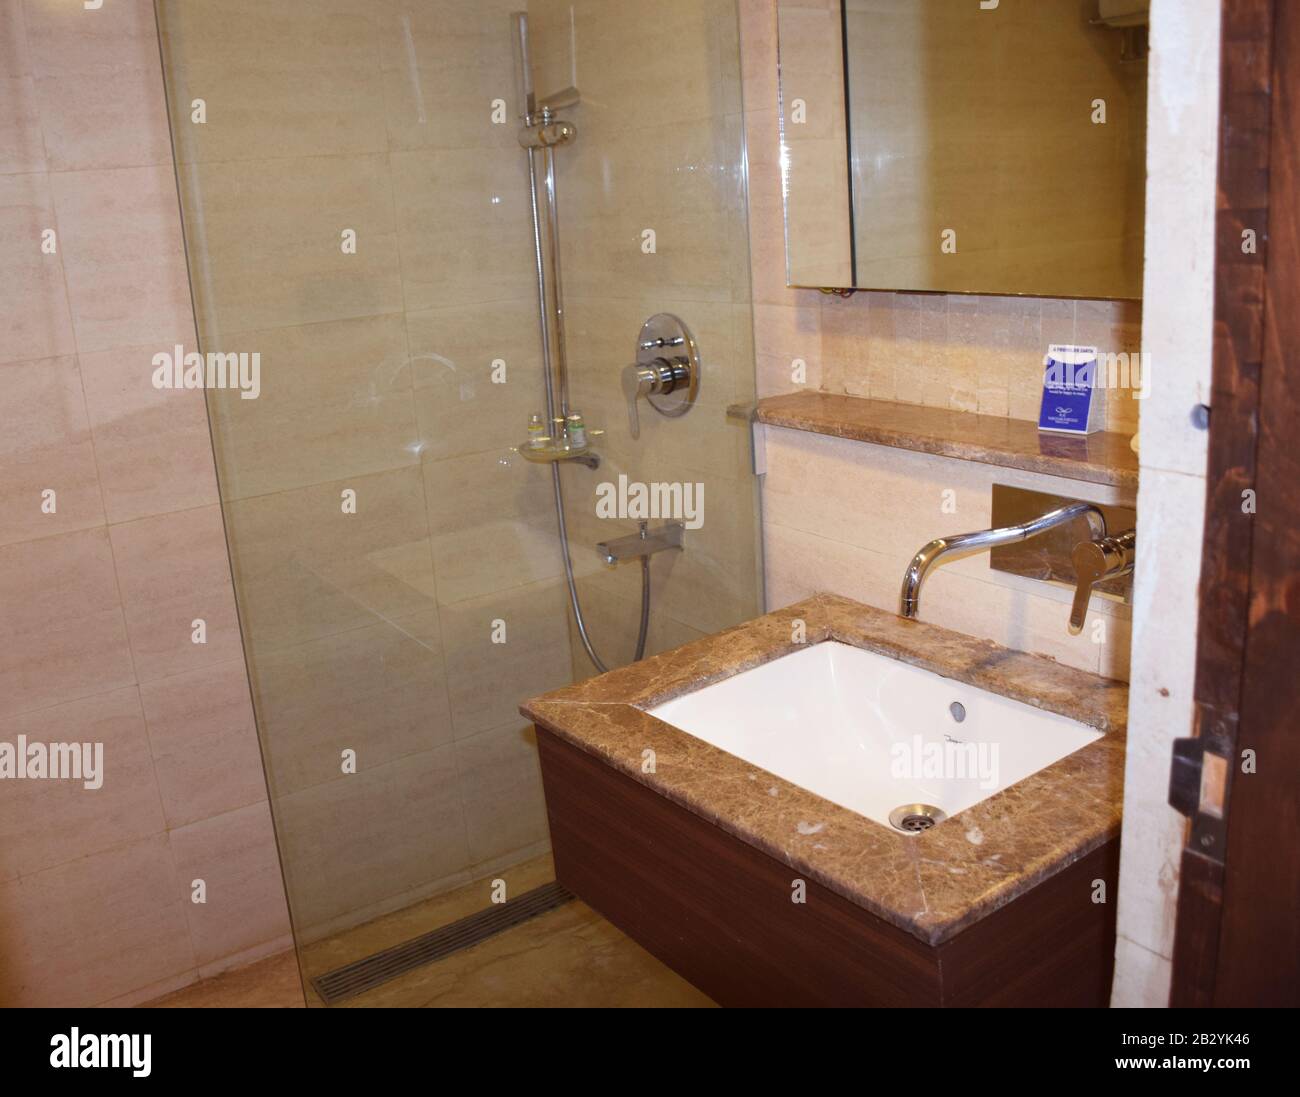 Attached restroom or washroom of a hotel room in India. Indian hotel loo Stock Photo